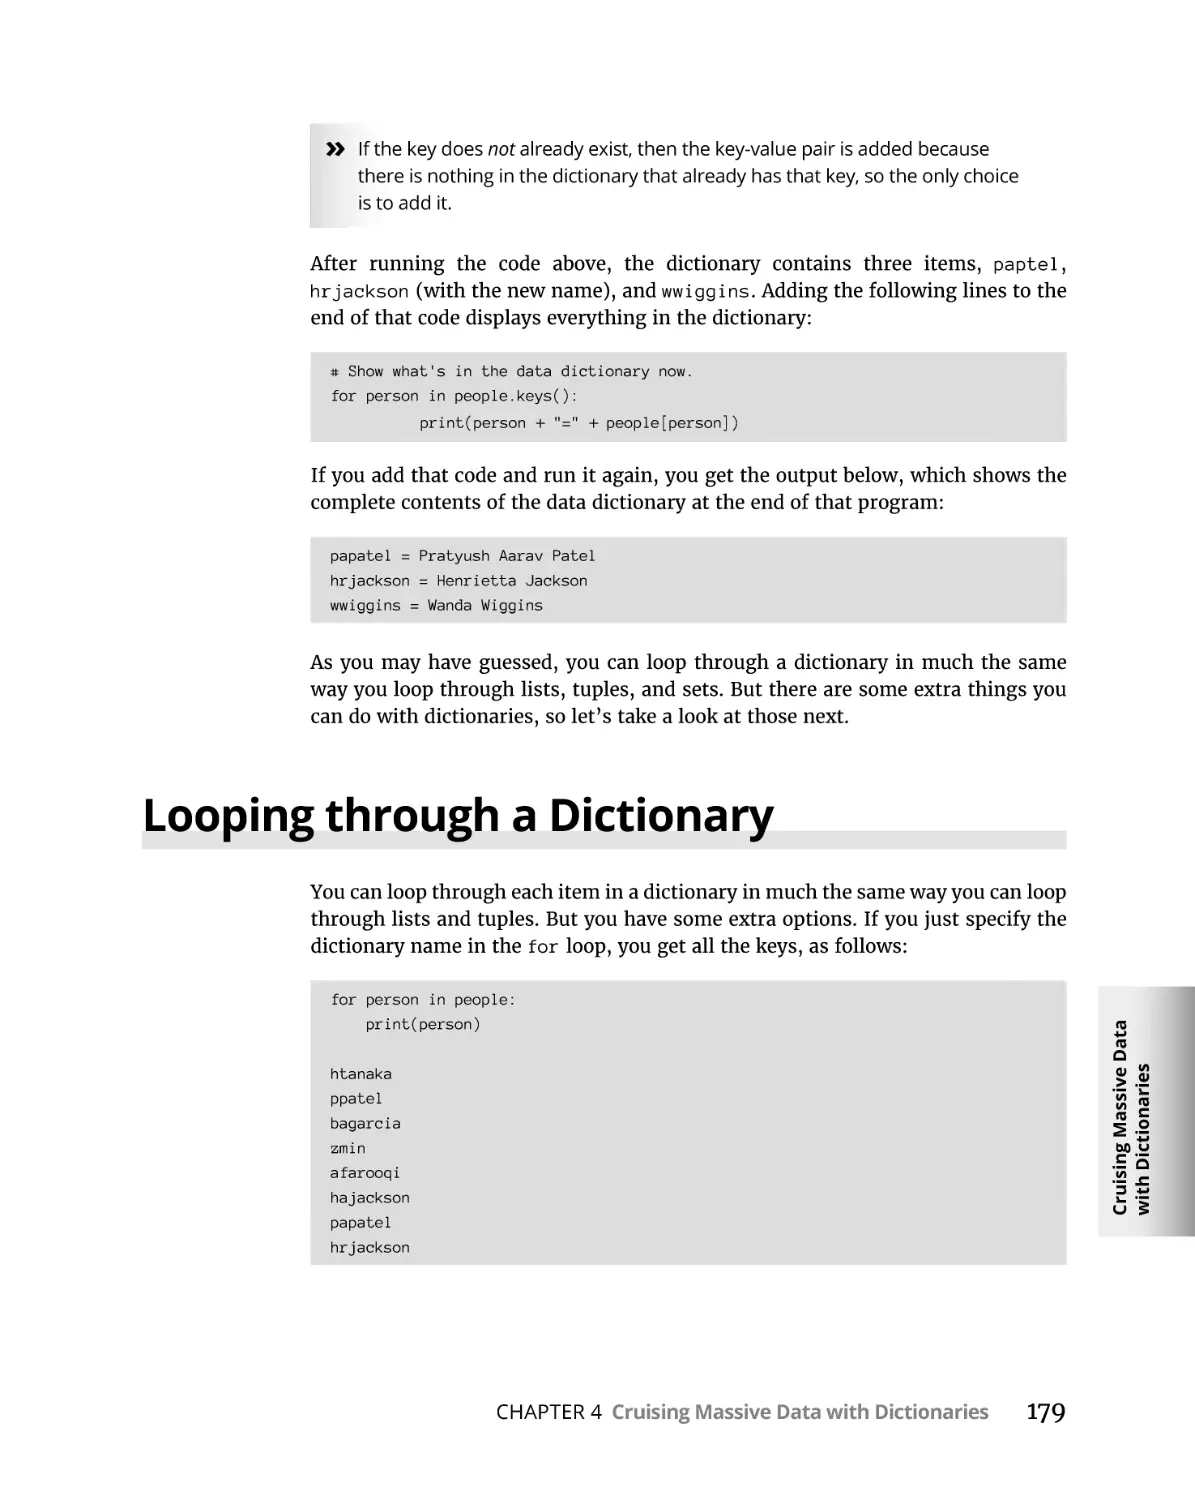 Looping through a Dictionary